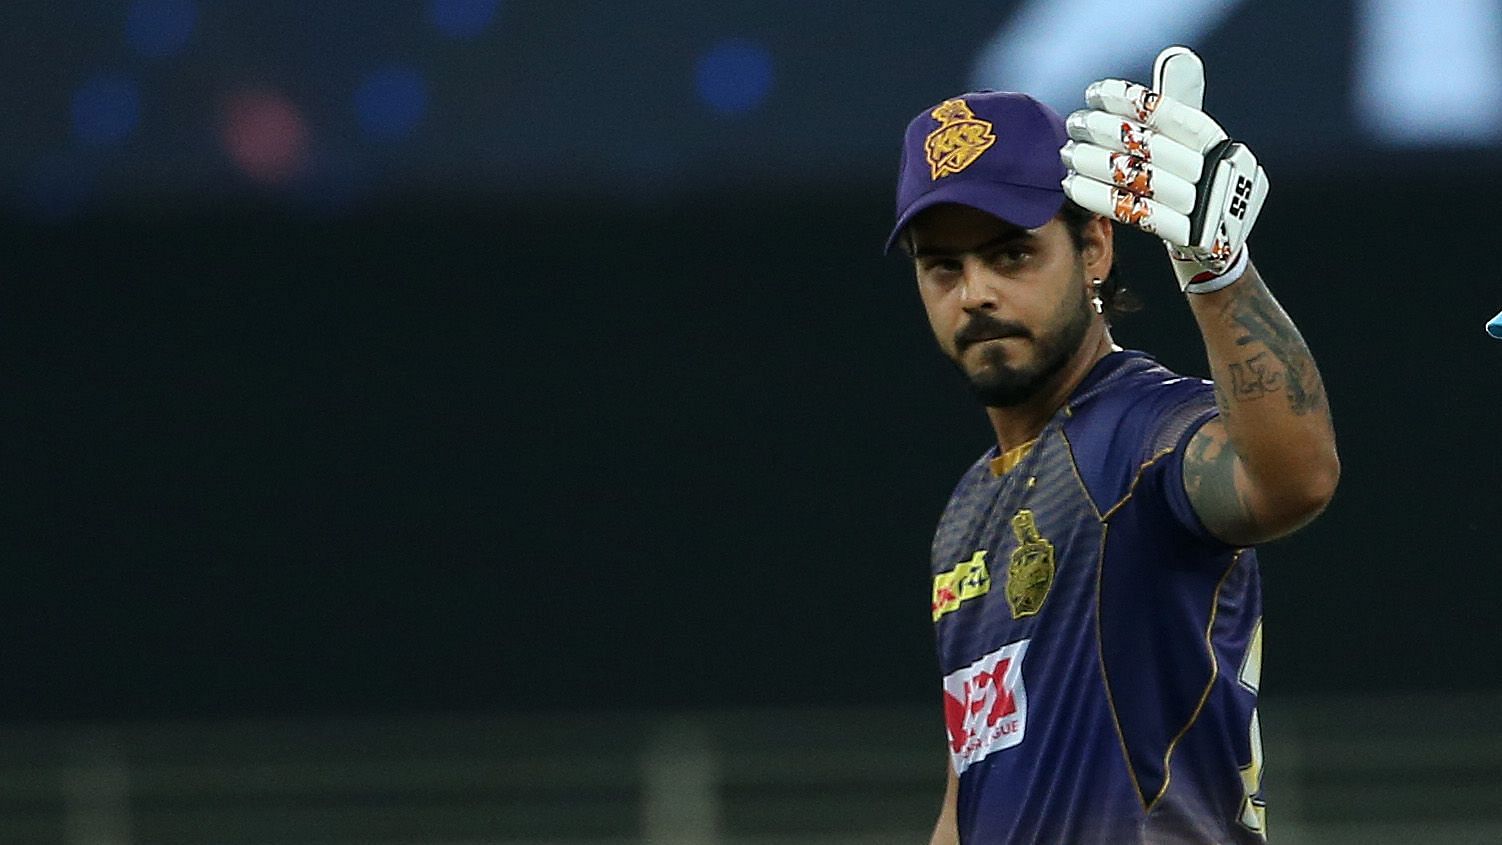 KKR were put into bat first by MS Dhoni and they have posted 172/5 in their 20 overs.